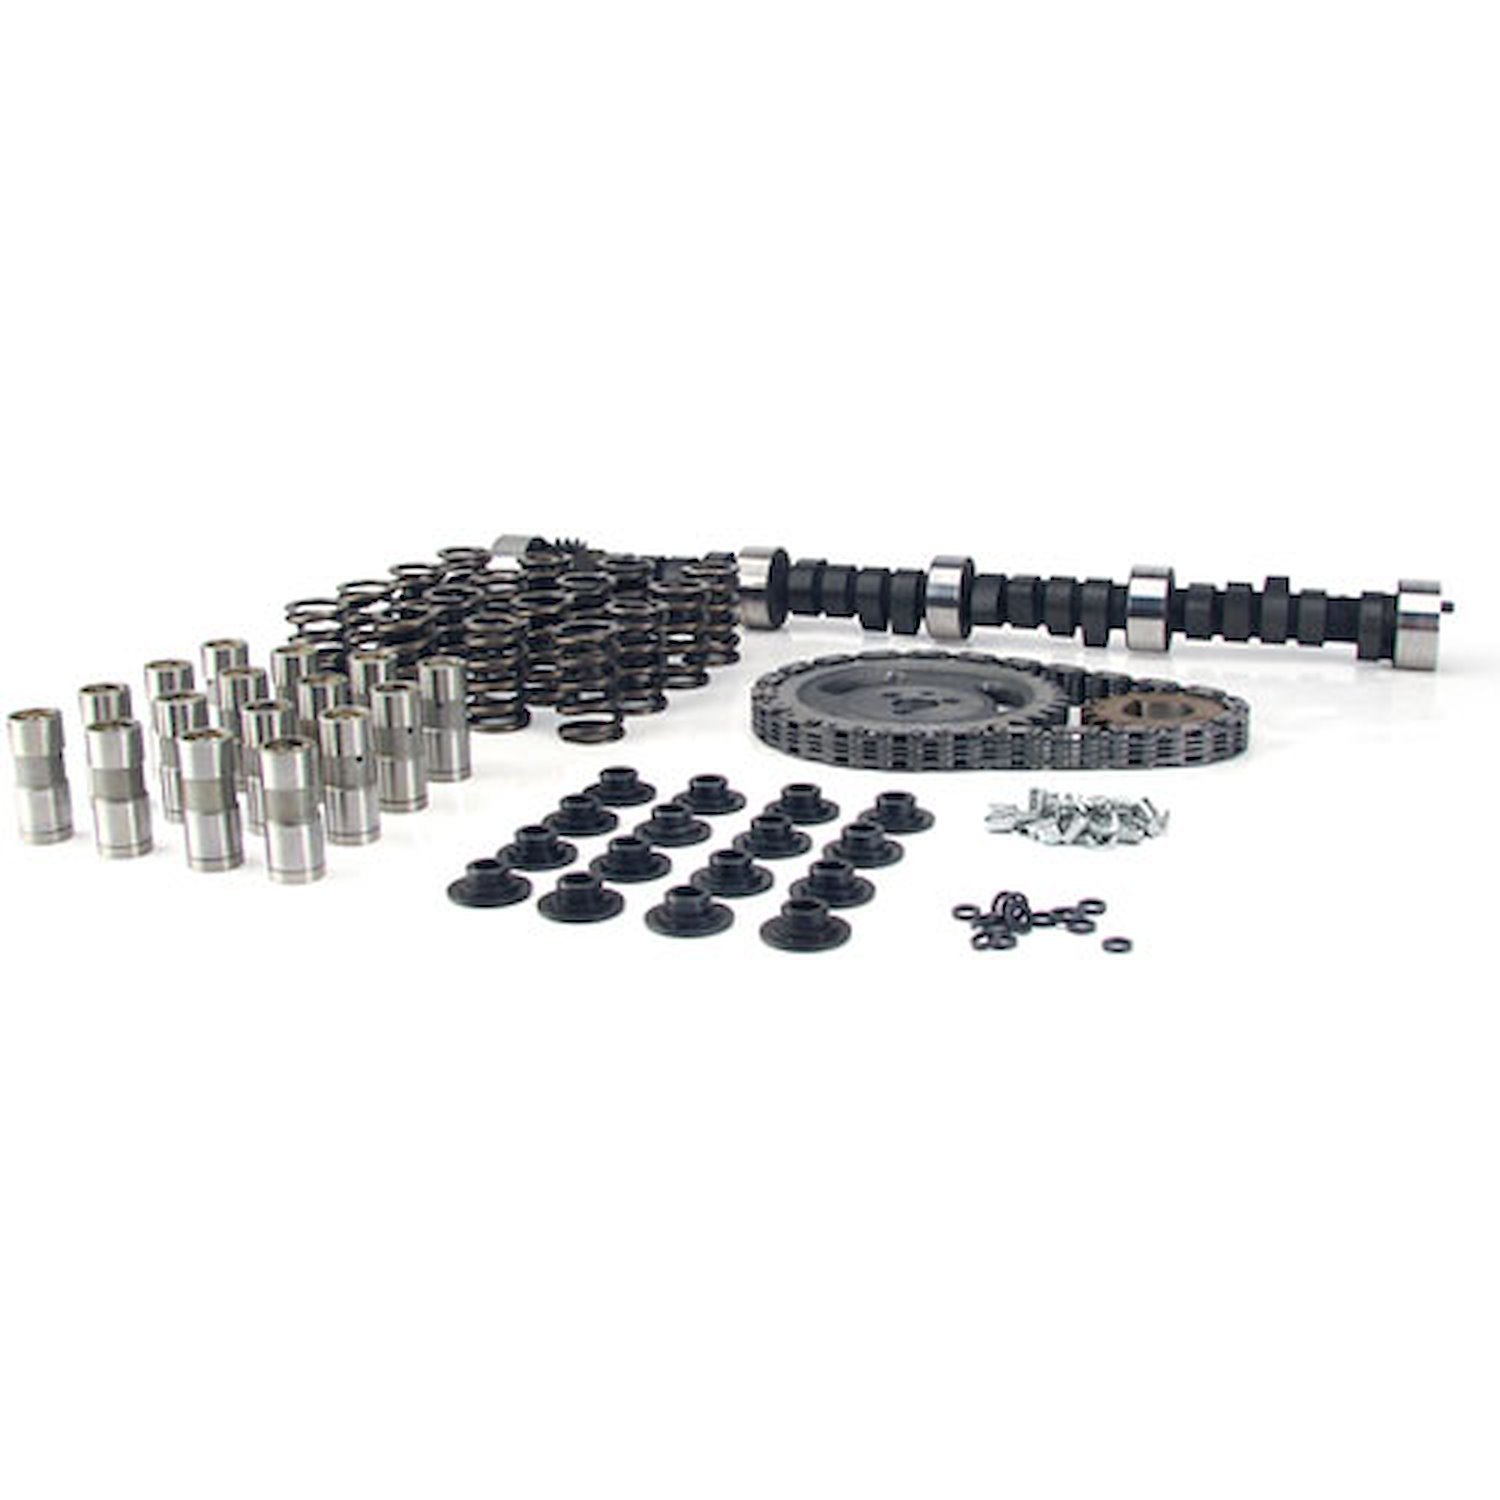 Xtreme Energy 284H Hydraulic Flat Tappet Camshaft Complete Kit Lift: .504" /.510" Duration: 262°/270° RPM Range: 1300-5600